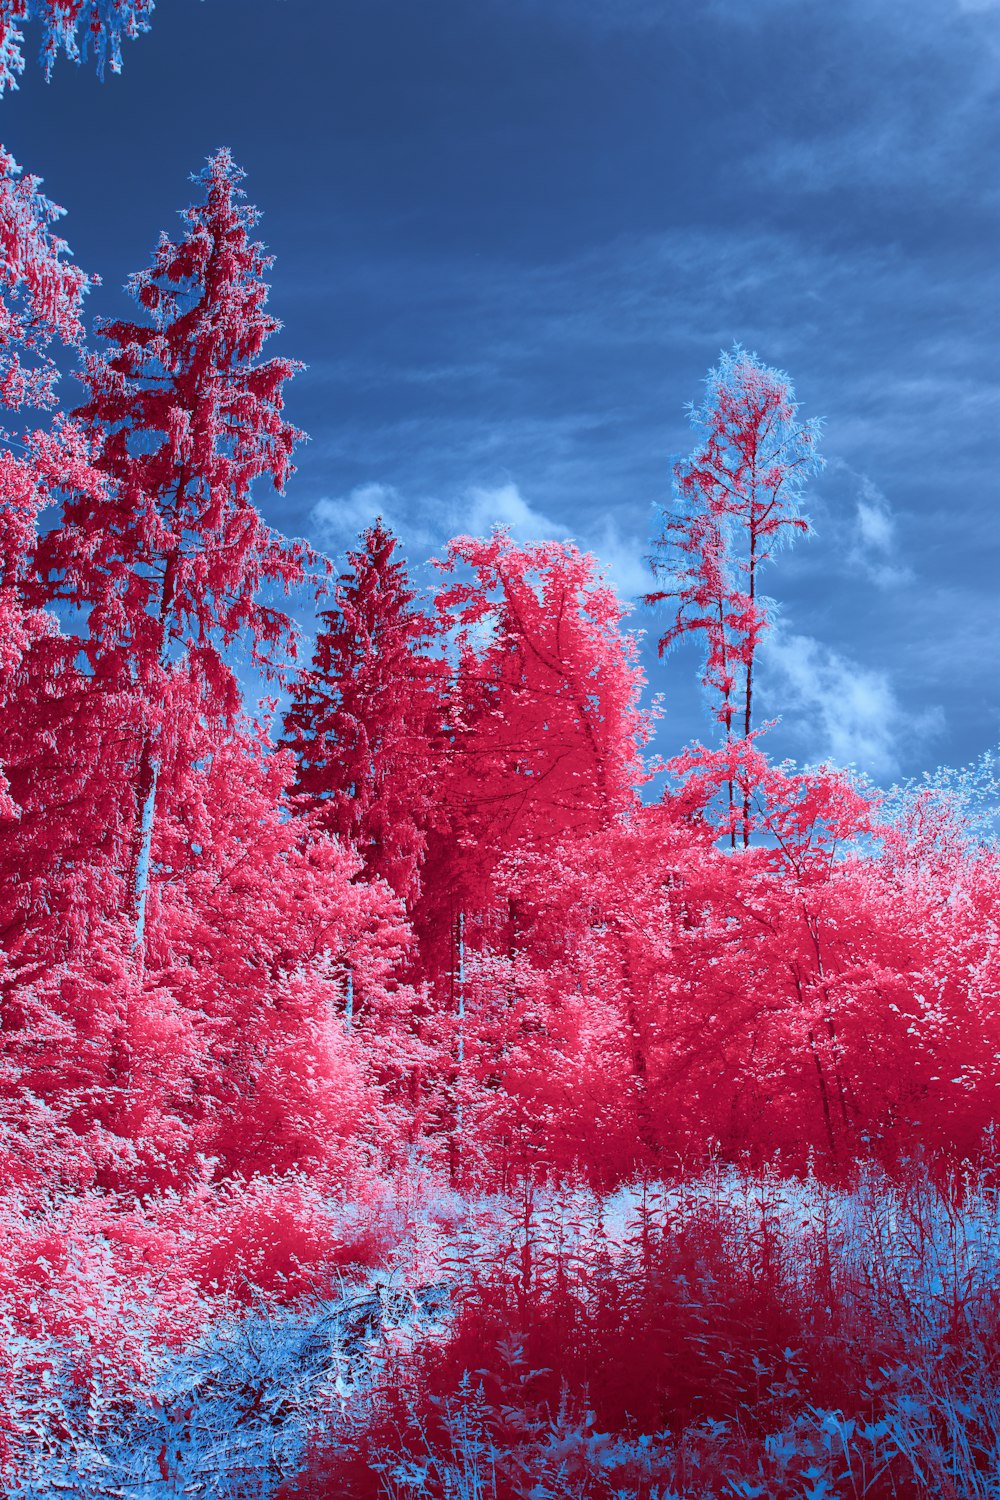 red leaf trees under cloudy sky during daytime